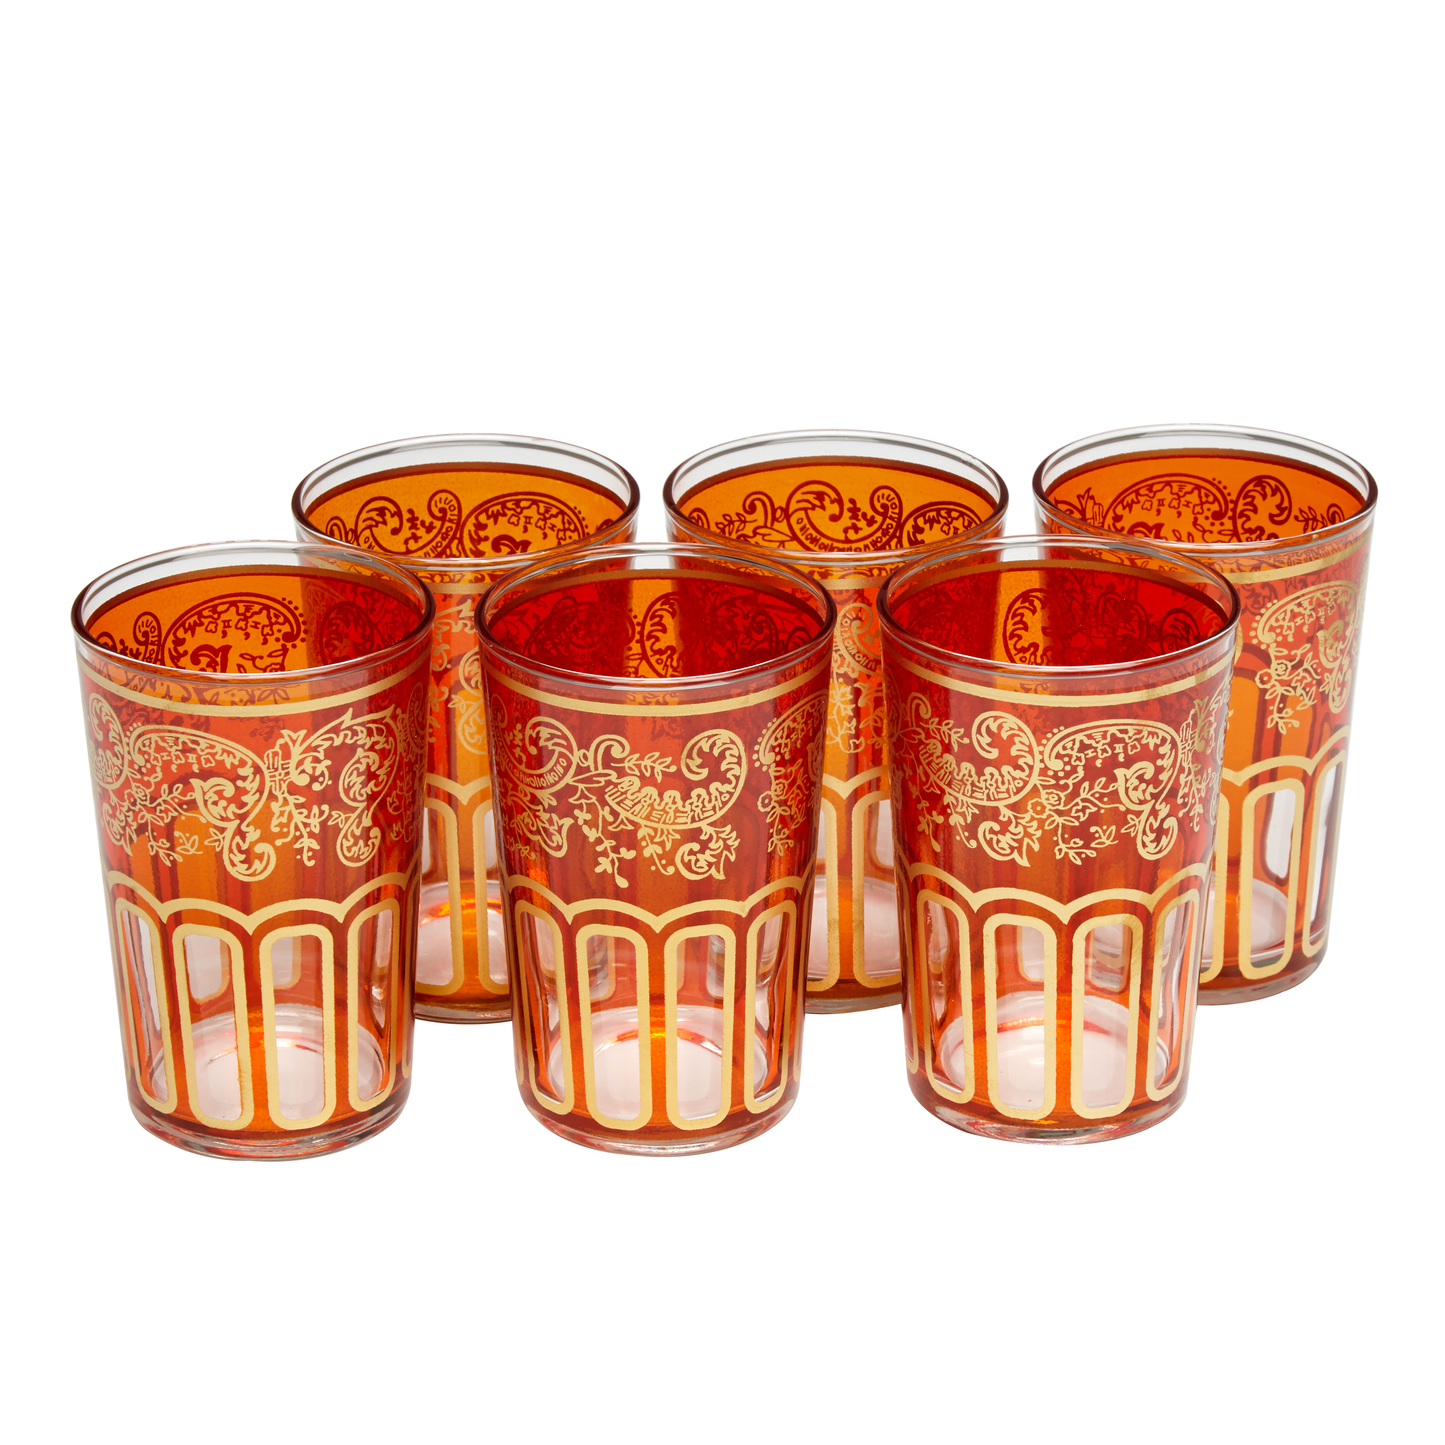 Moroccan Tea Glasses Orange & Gold Beautiful Classical Design Hand Painted Hand Decorated Pack of 6